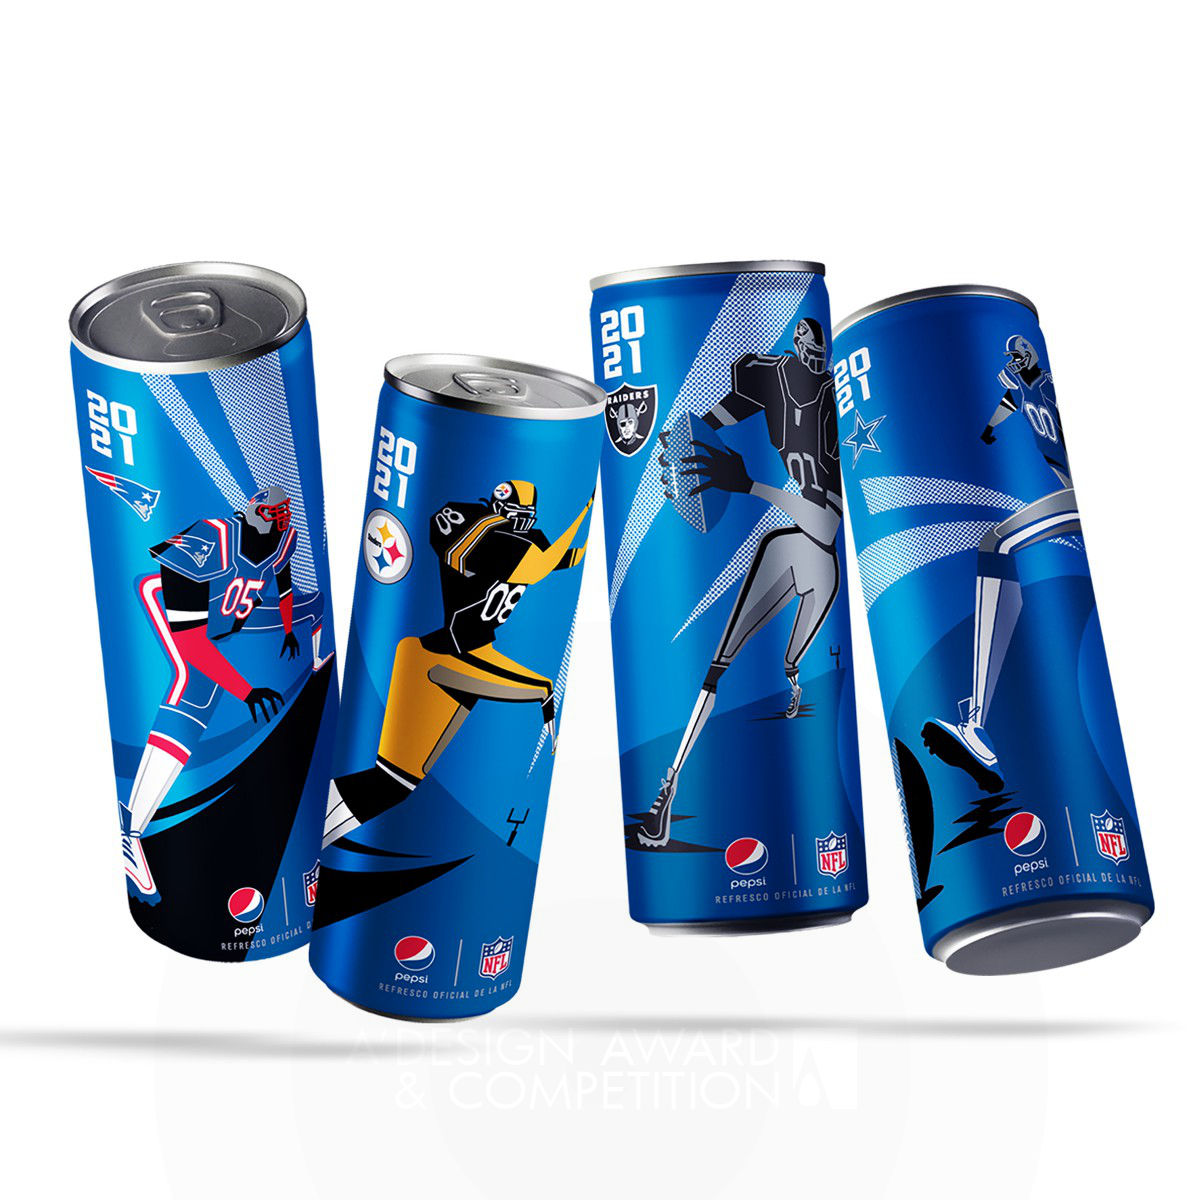 Pepsi NFL Limited Edition